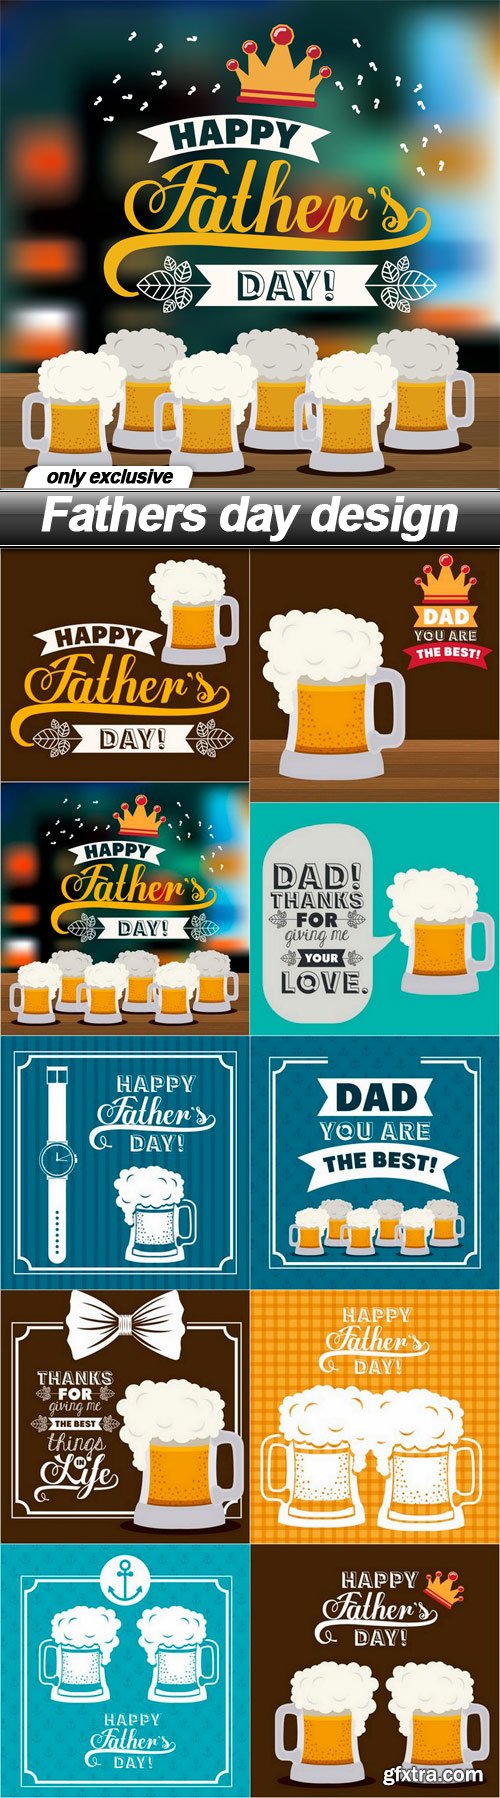 Fathers day design - 10 EPS